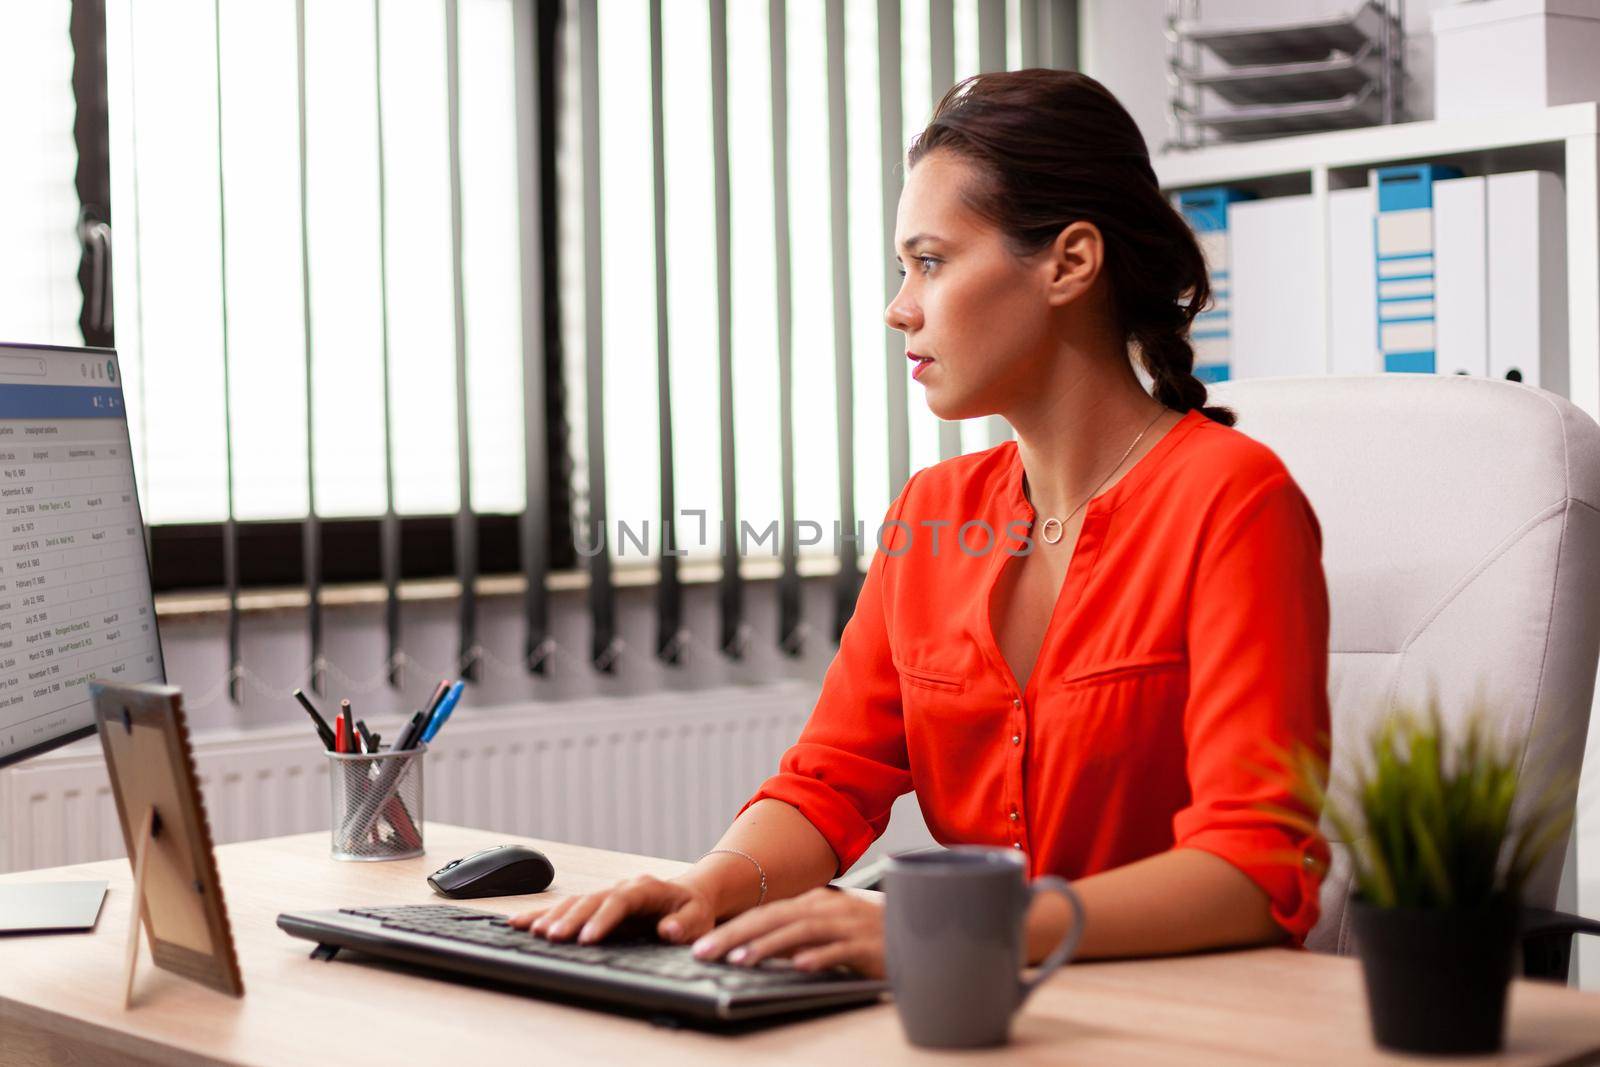 Businesswoman managerworking on professional finance expertise wearing red. Successful concentrated employer with busy carreer sitting at desk in office using modern pc.